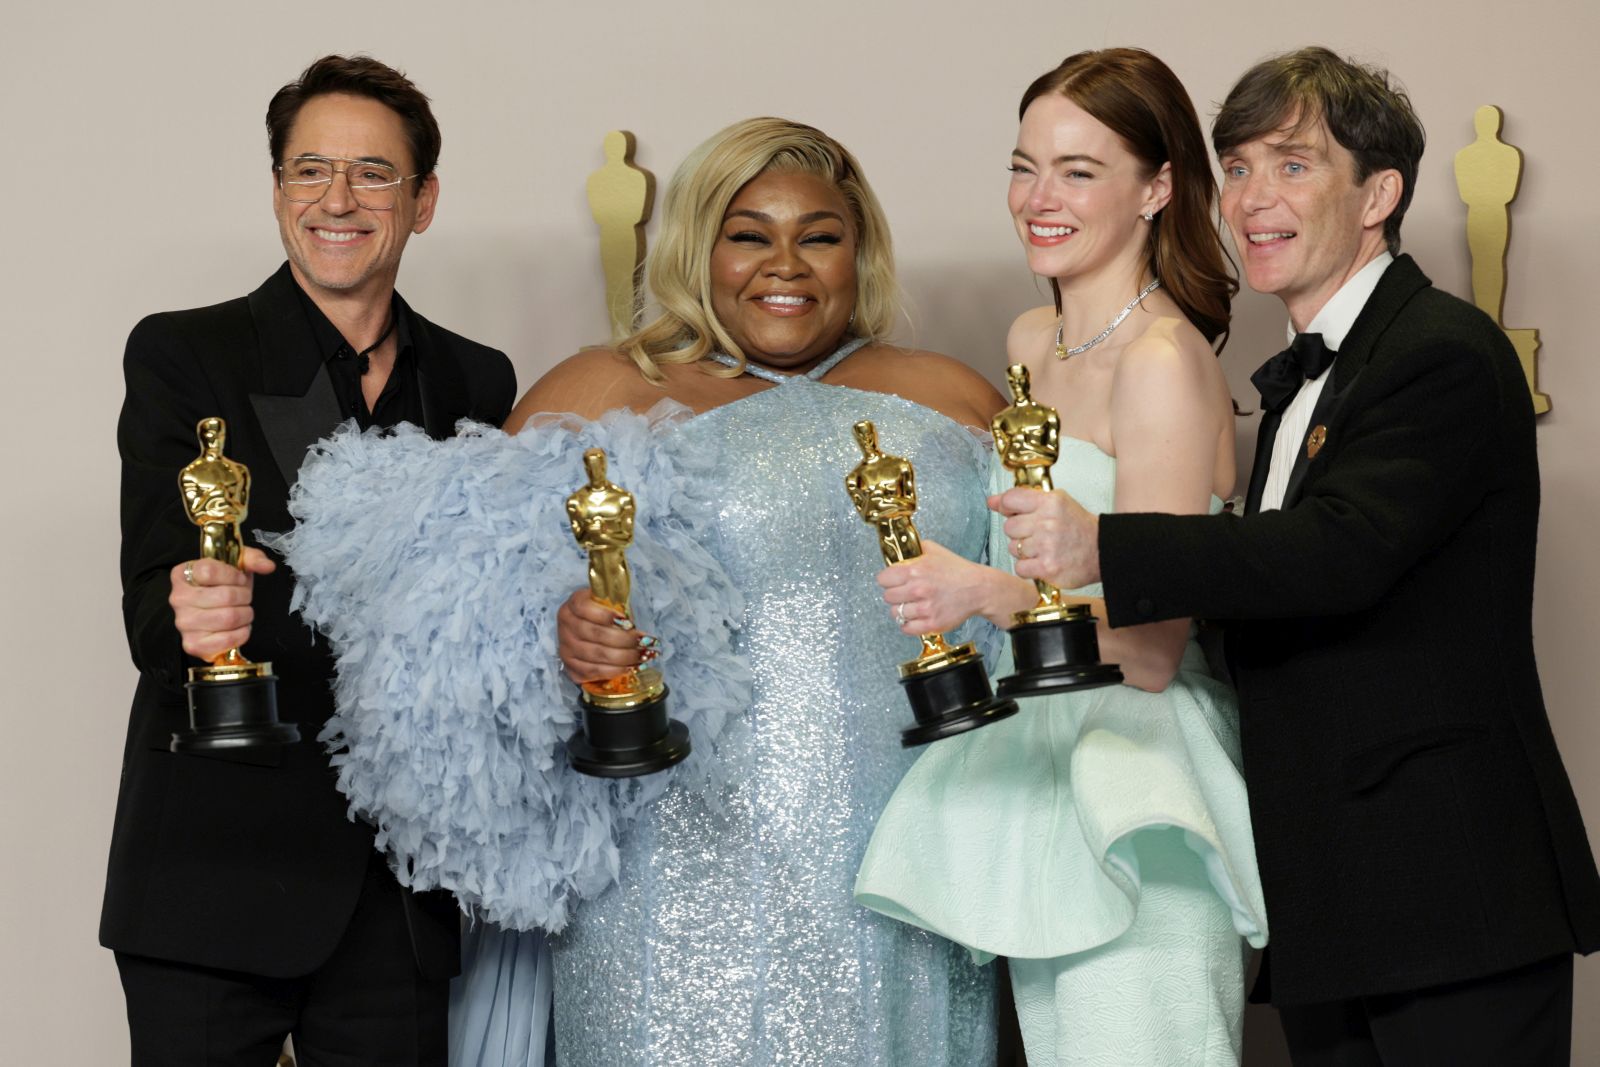 epa11213478 (L-R) Robert Downey Jr., Best Supporting Actor winner; Da'Vine Joy Randolph, Best Supporting Actress winner; Emma Stone, Best Actress winner; and Cillian Murphy, Best Actor winner, hold up their Oscars in the press room during the 96th annual Academy Awards ceremony at the Dolby Theatre in the Hollywood neighborhood of Los Angeles, California, USA, 10 March 2024. The Oscars are presented for outstanding individual or collective efforts in filmmaking in 23 categories.  EPA/ALLISON DINNER